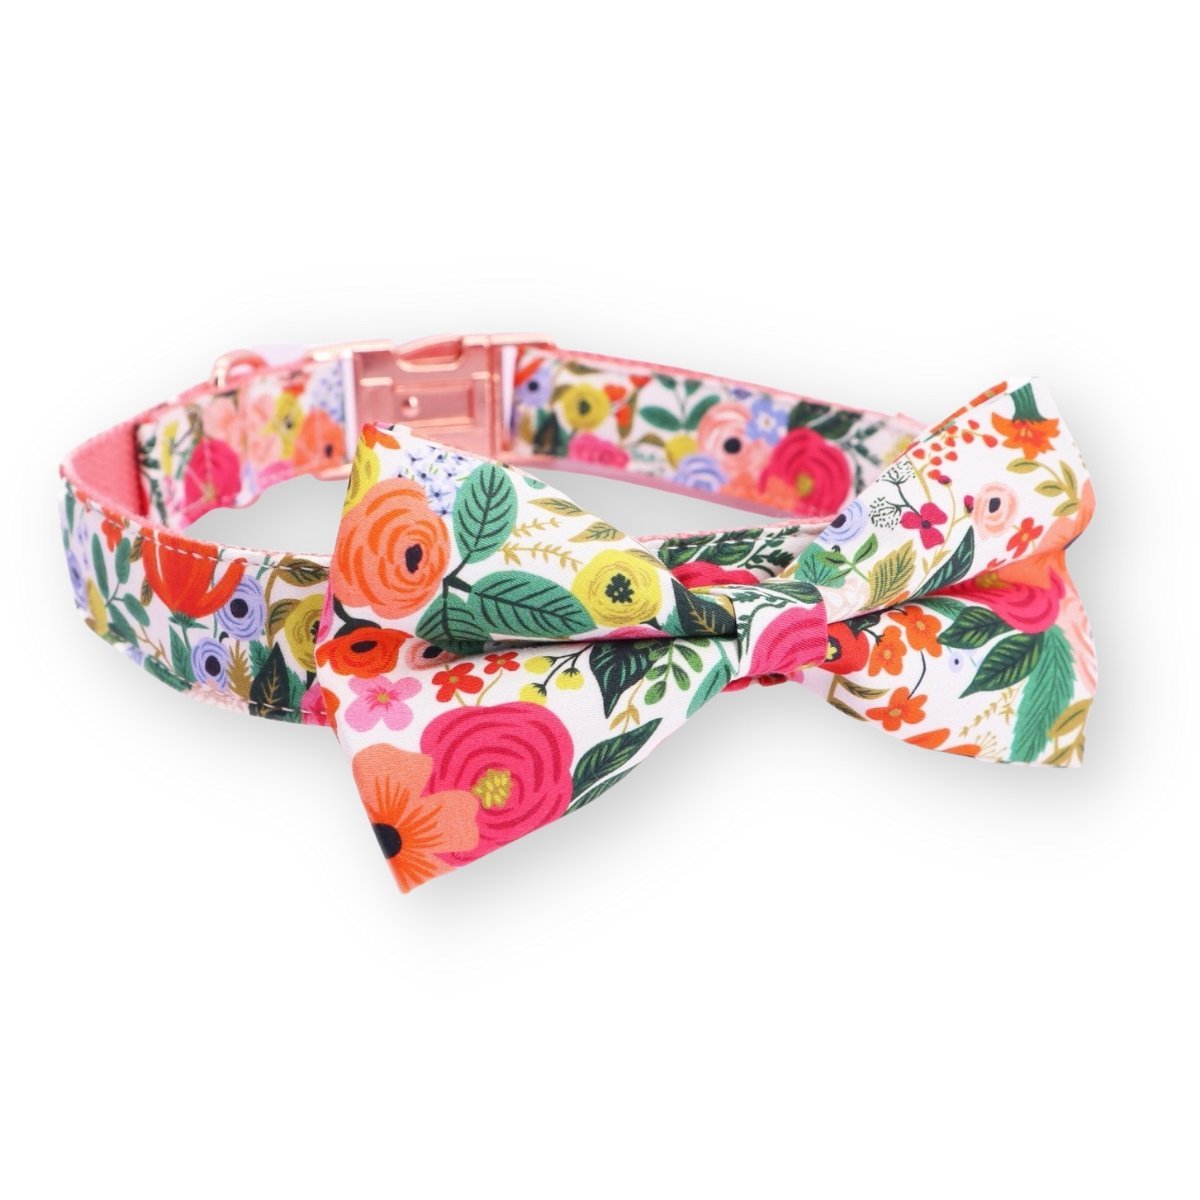 Cute & Super Safe Hardware Buckle Collar with Detachable Flower Bows.  Adorable Floral Bowties – Sniff & Bark